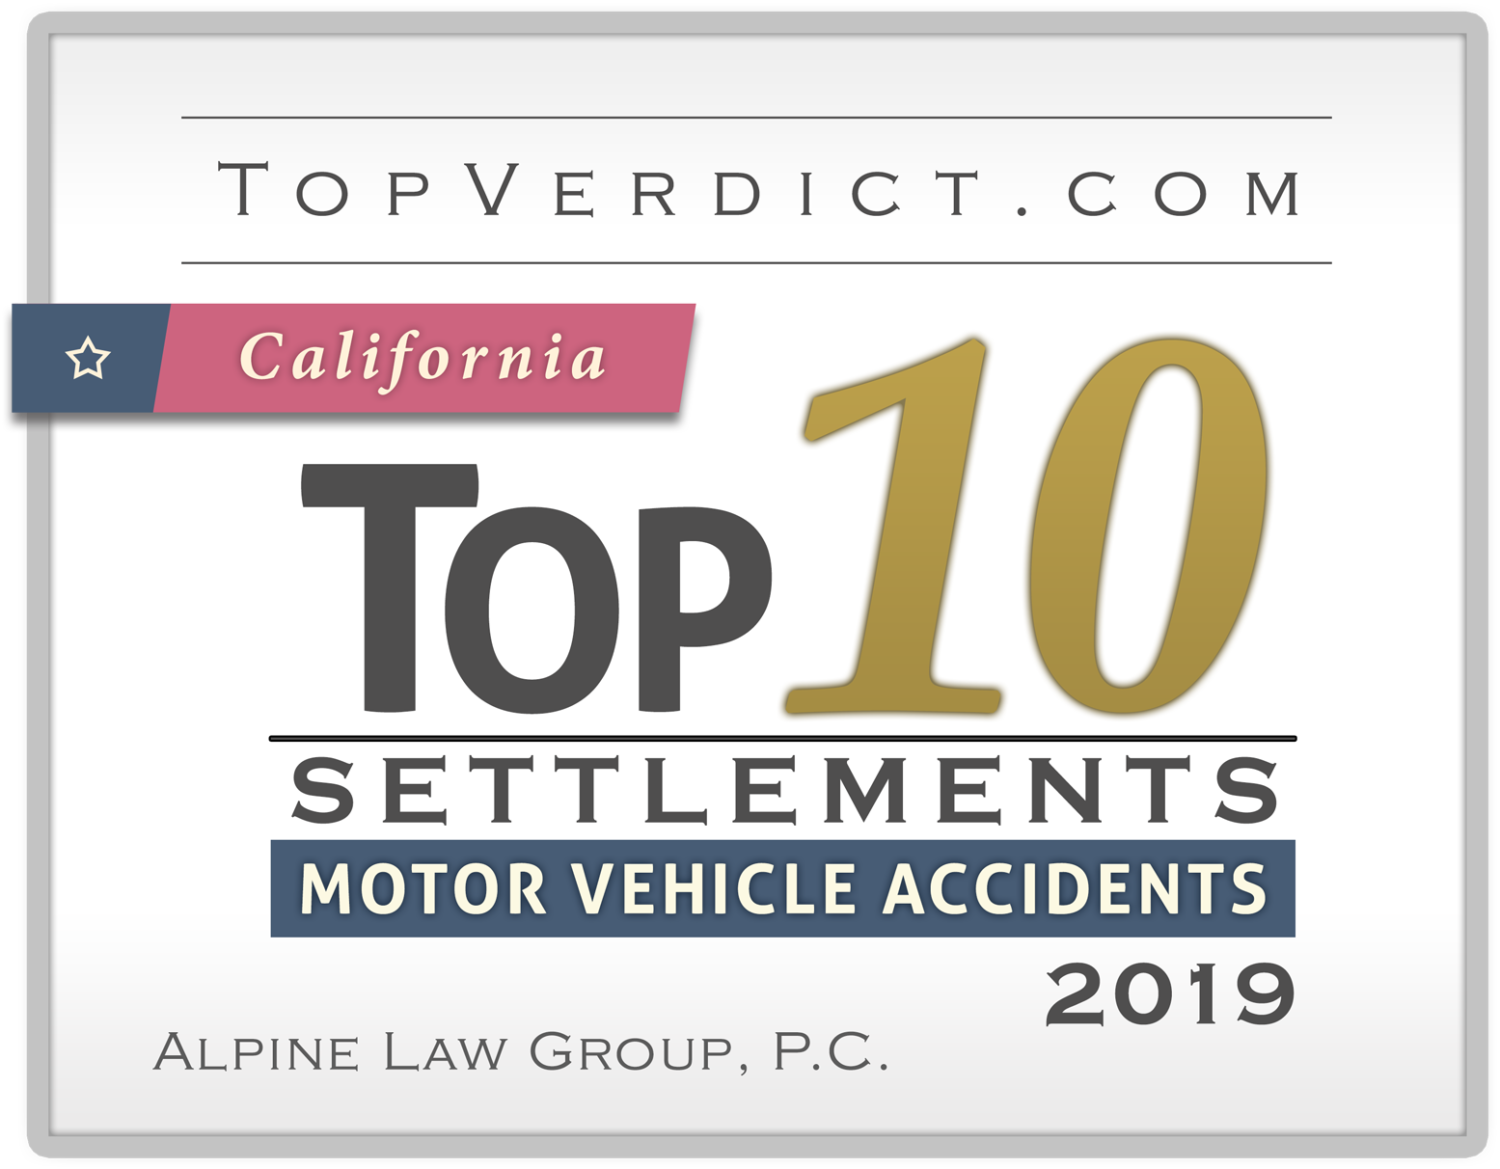 Top 10 Settlement Motor Vehicle Accidents